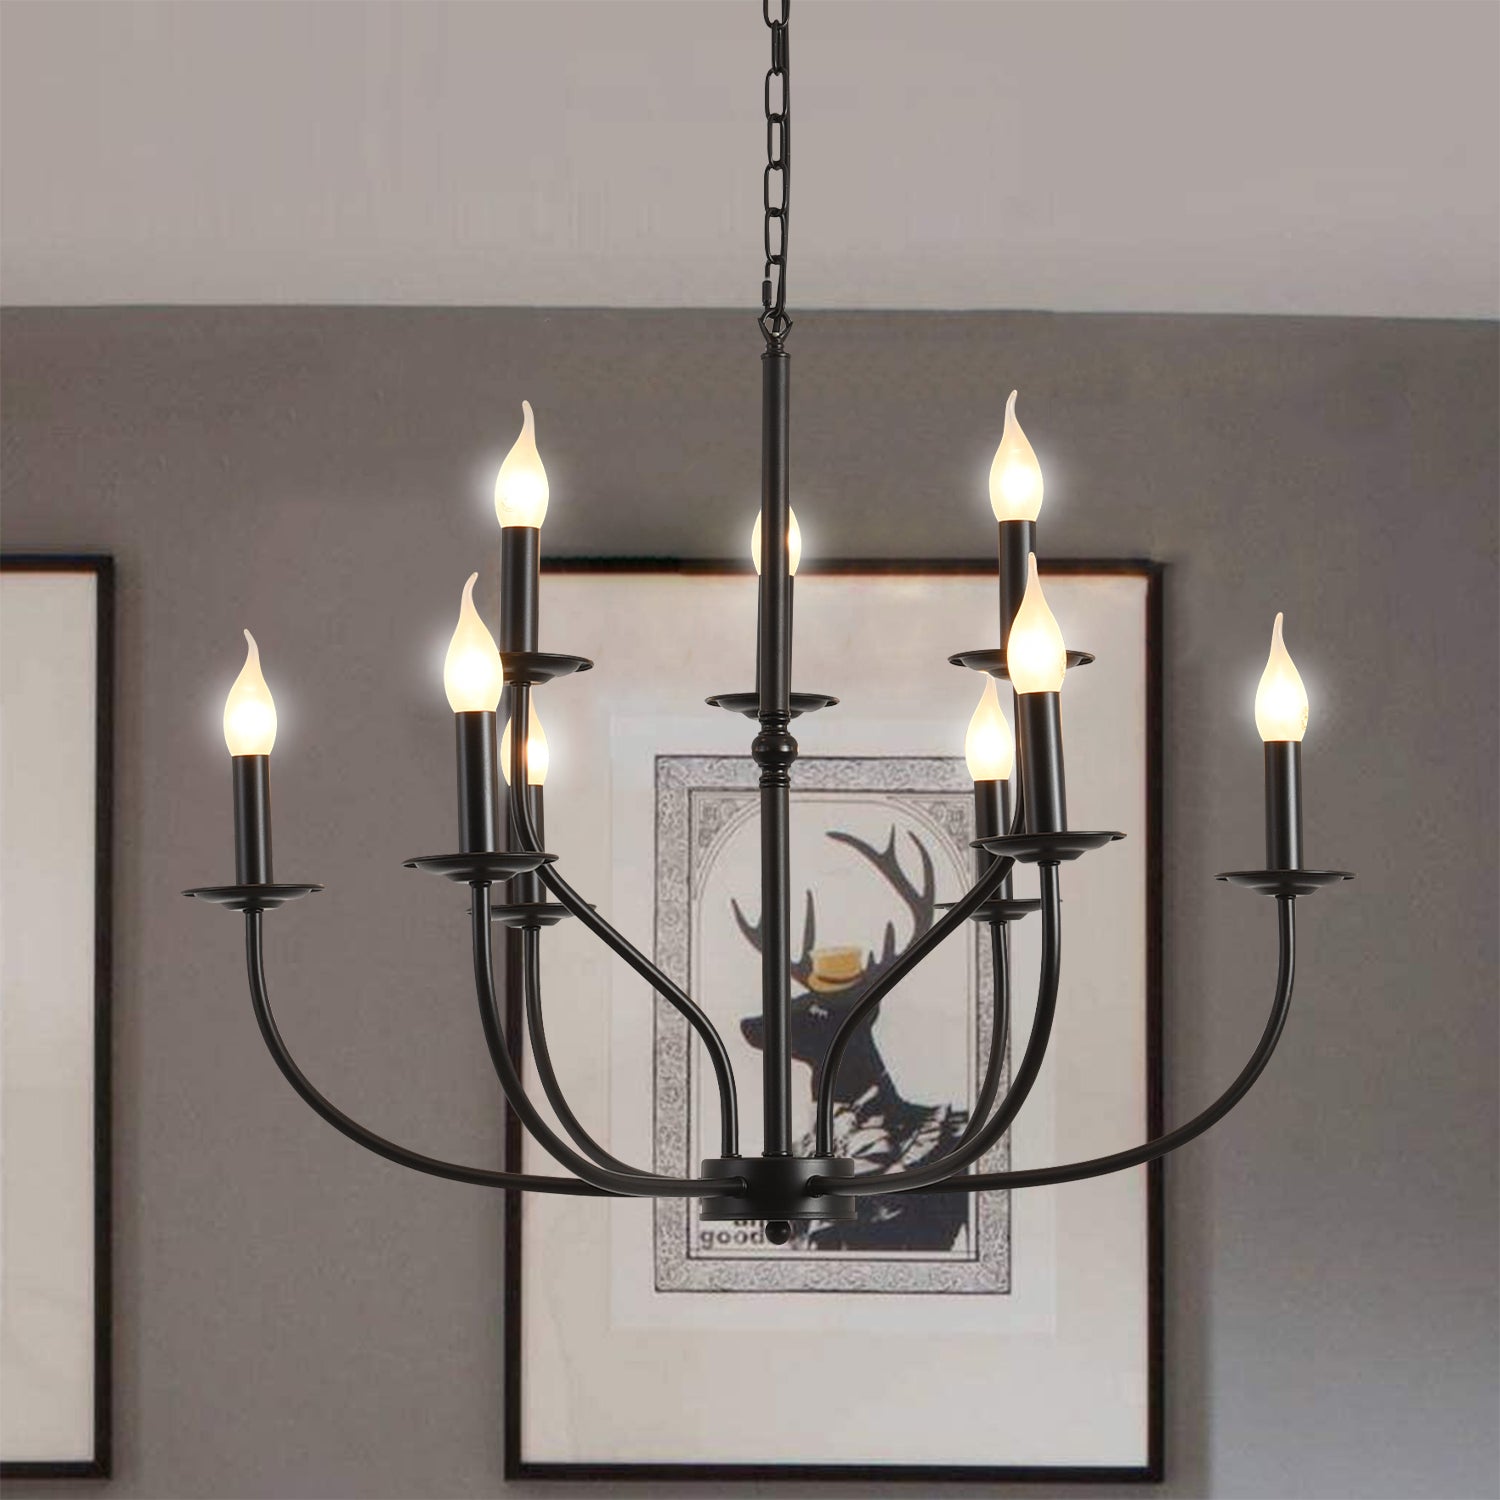 Nine Bulb Classic Black Chandelier shown hung in a study